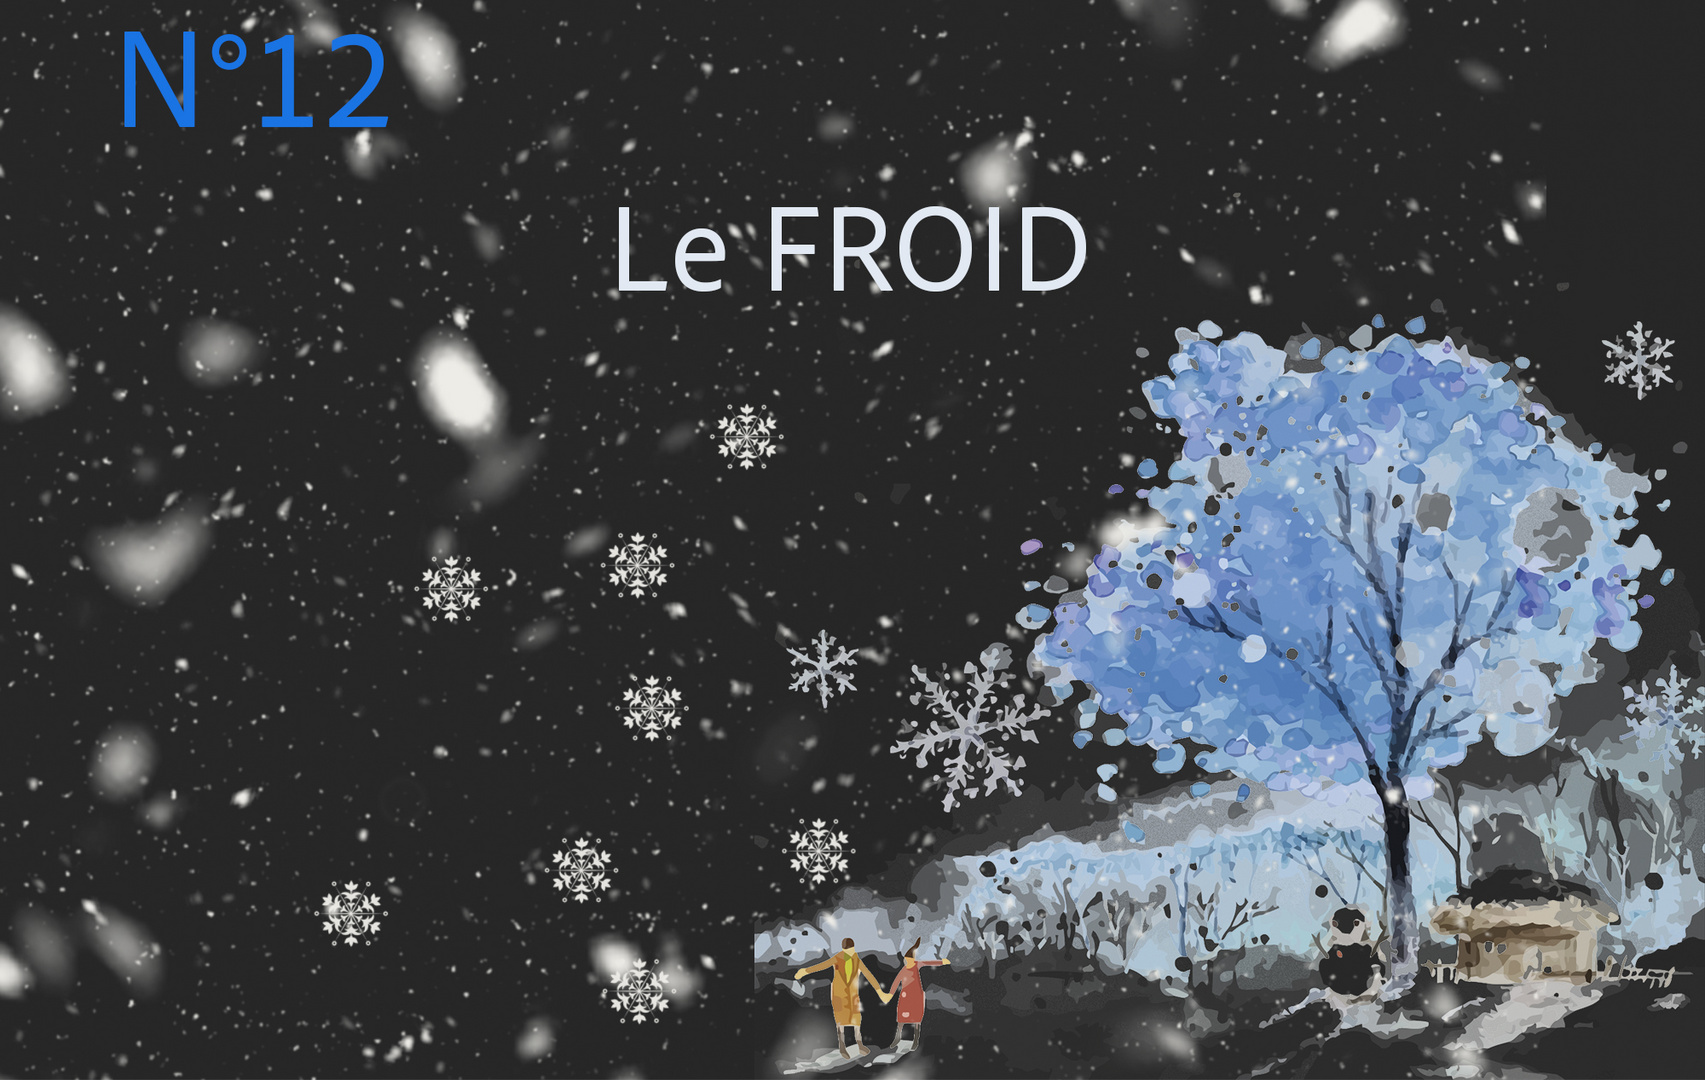 Le froid